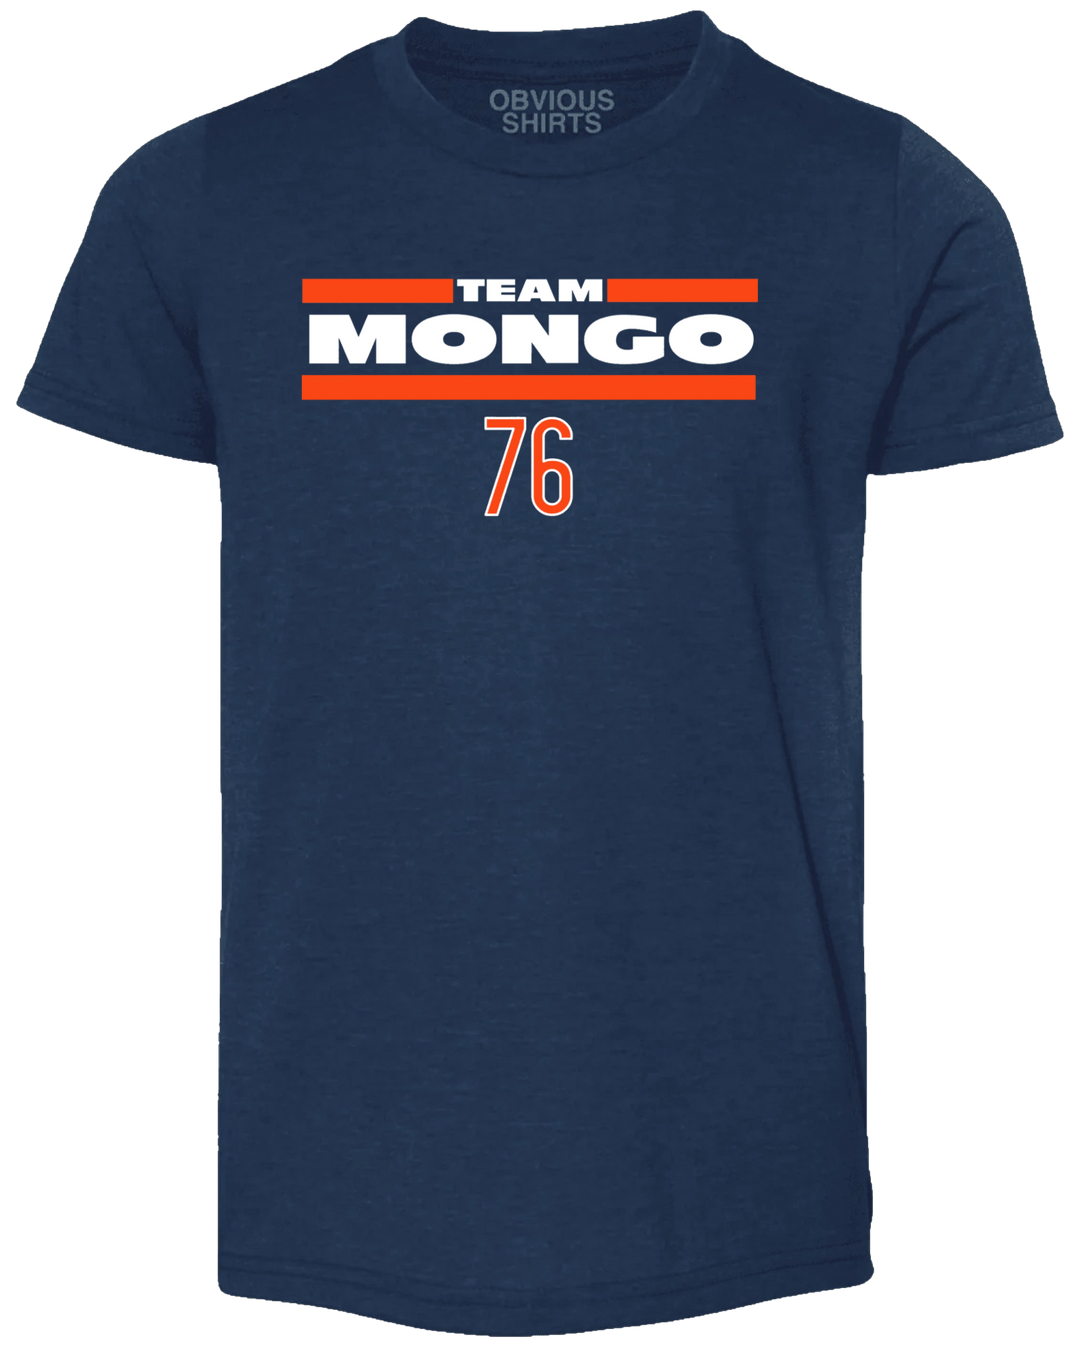 TEAM MONGO 76 (YOUTH) - OBVIOUS SHIRTS